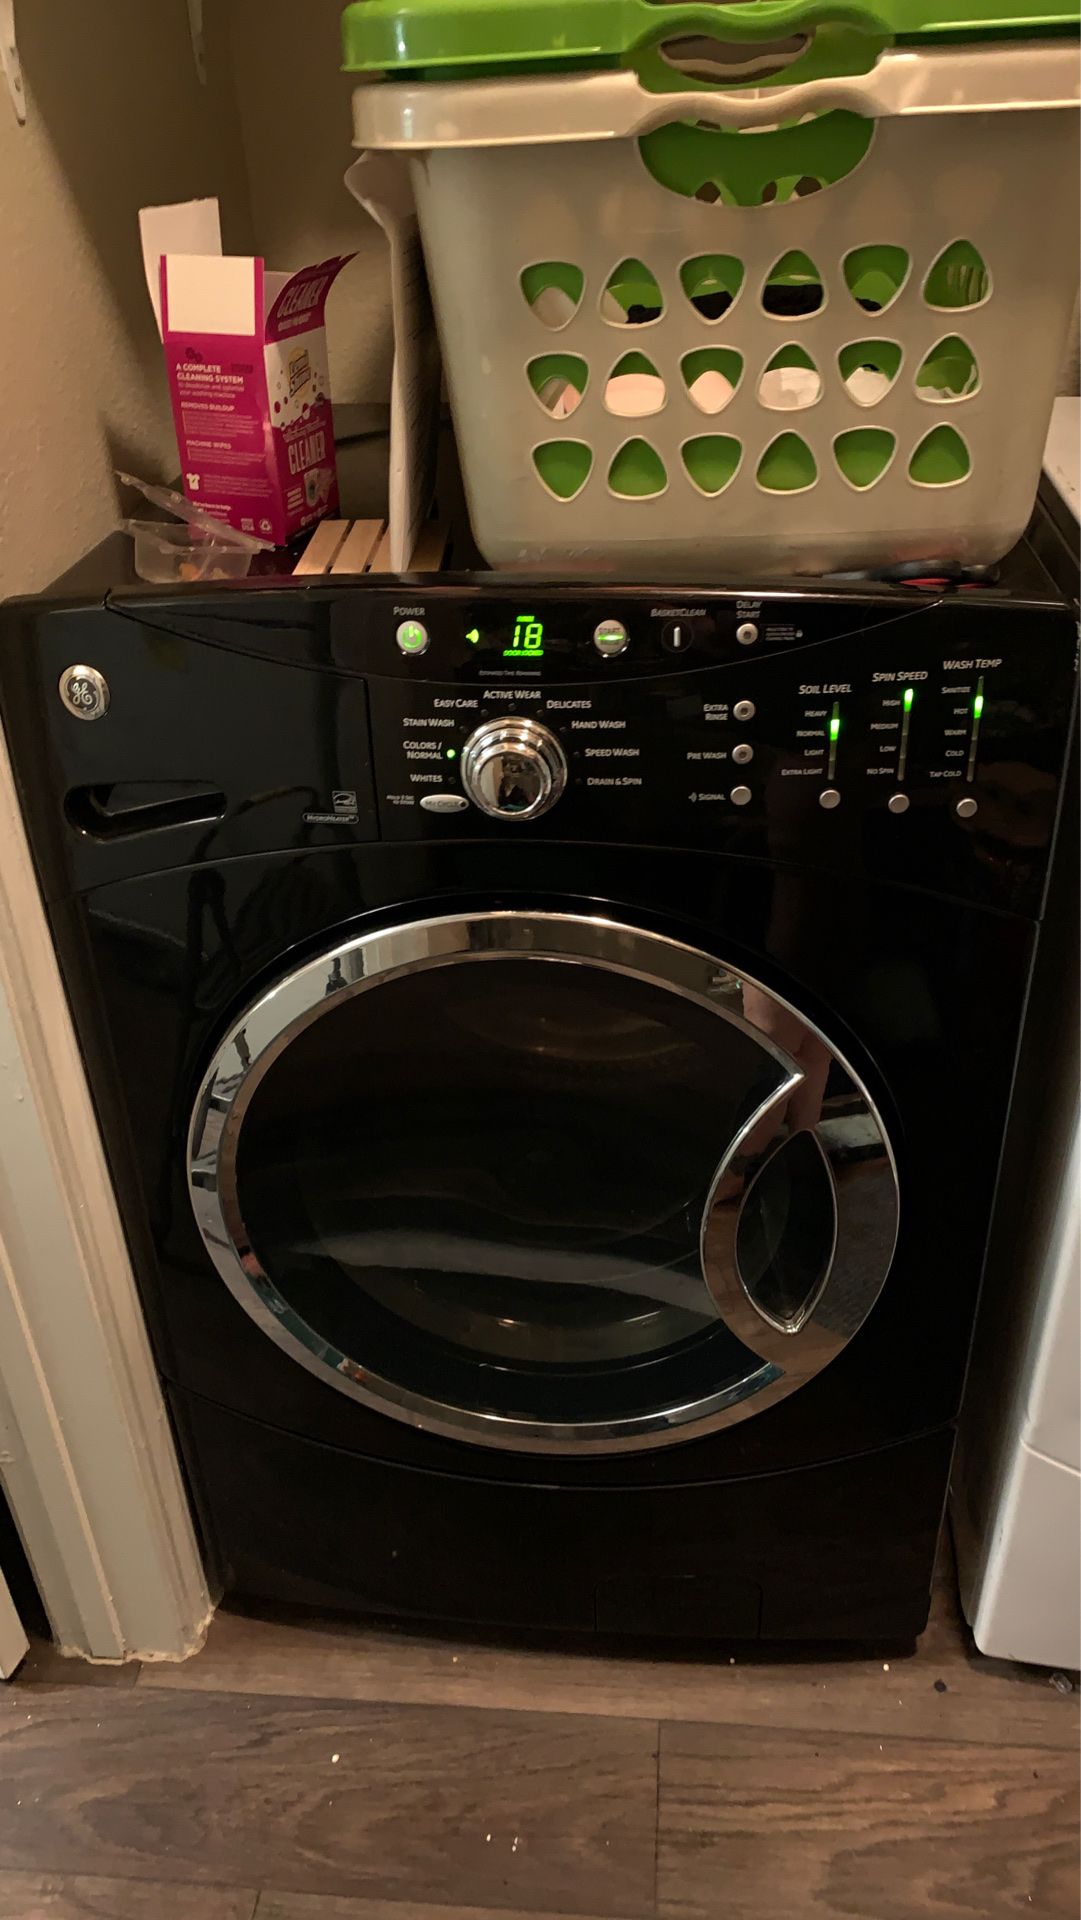 GE brand washer and dryer